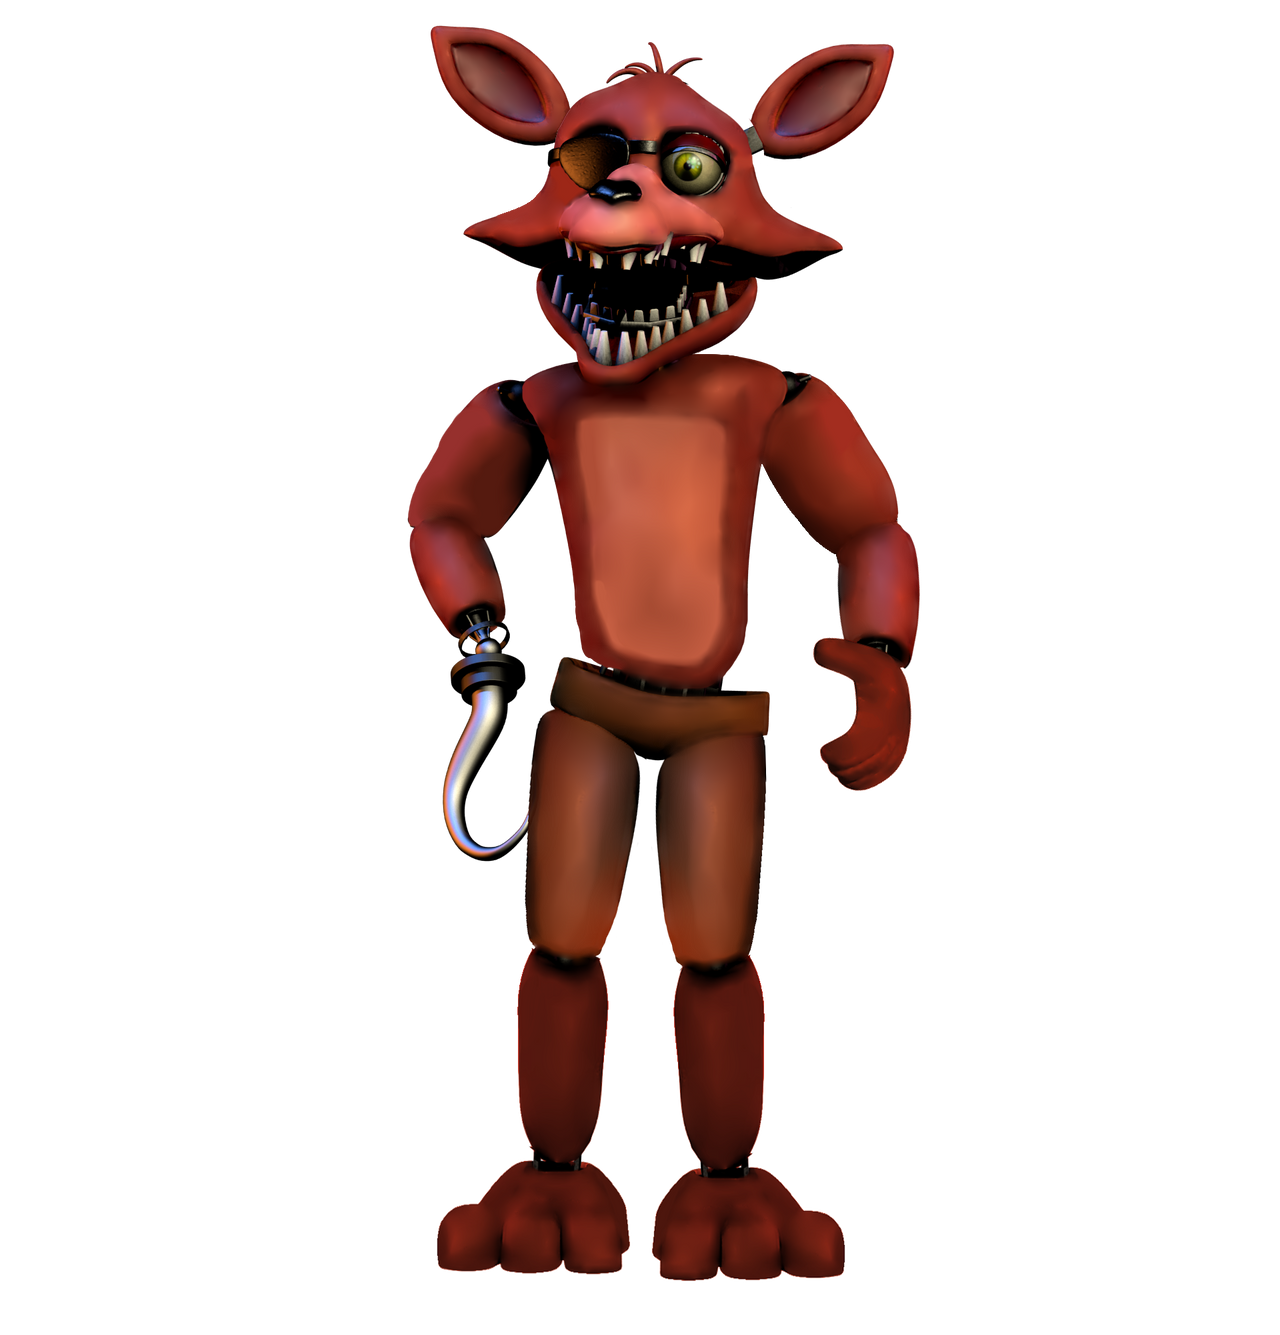 Fnaf Speed Edit, Fixed Withered Foxy